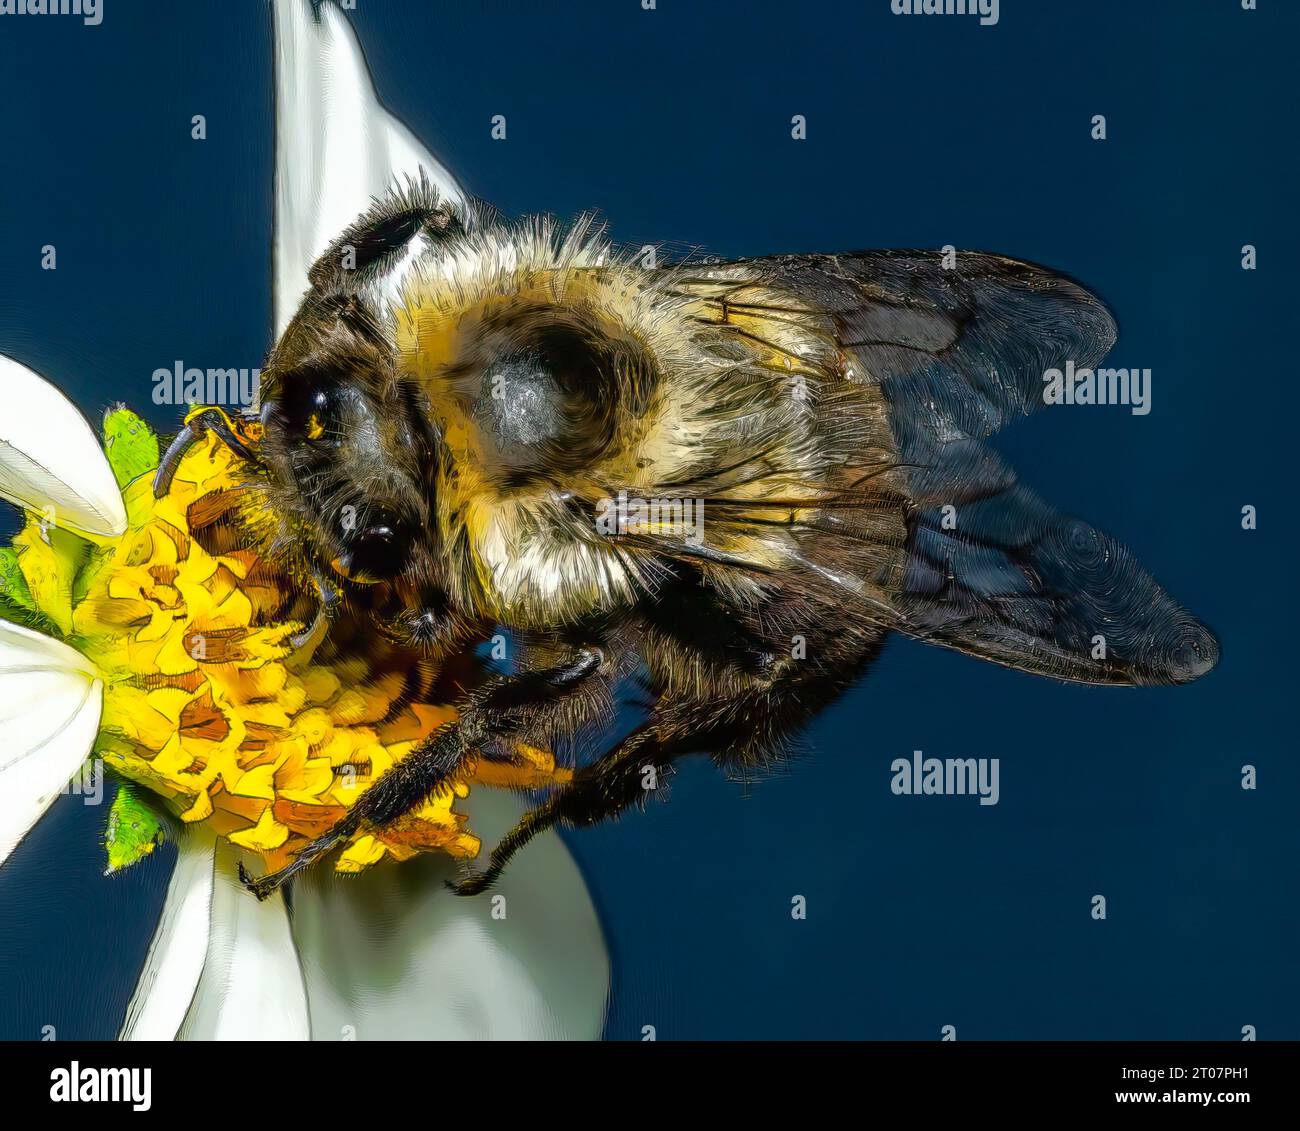 leaf cutter bee gathering pollen from yellow and white flower. Stock Photo